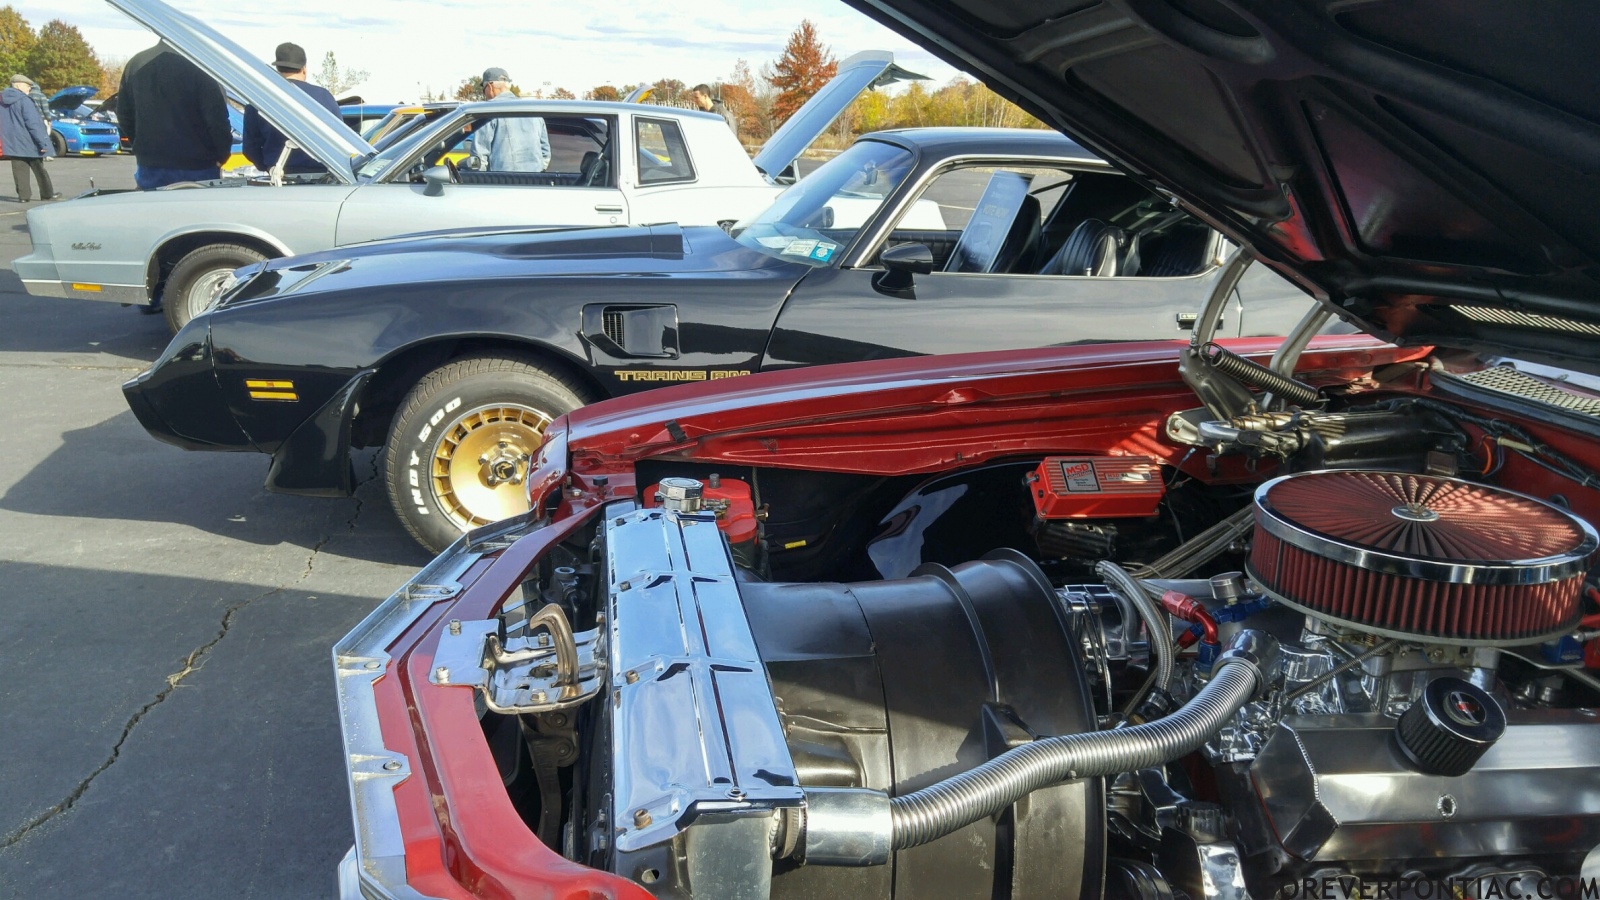 Trans Am and Monte Carlos Linden NJ Airport Charity Car Show Nov 6 2016